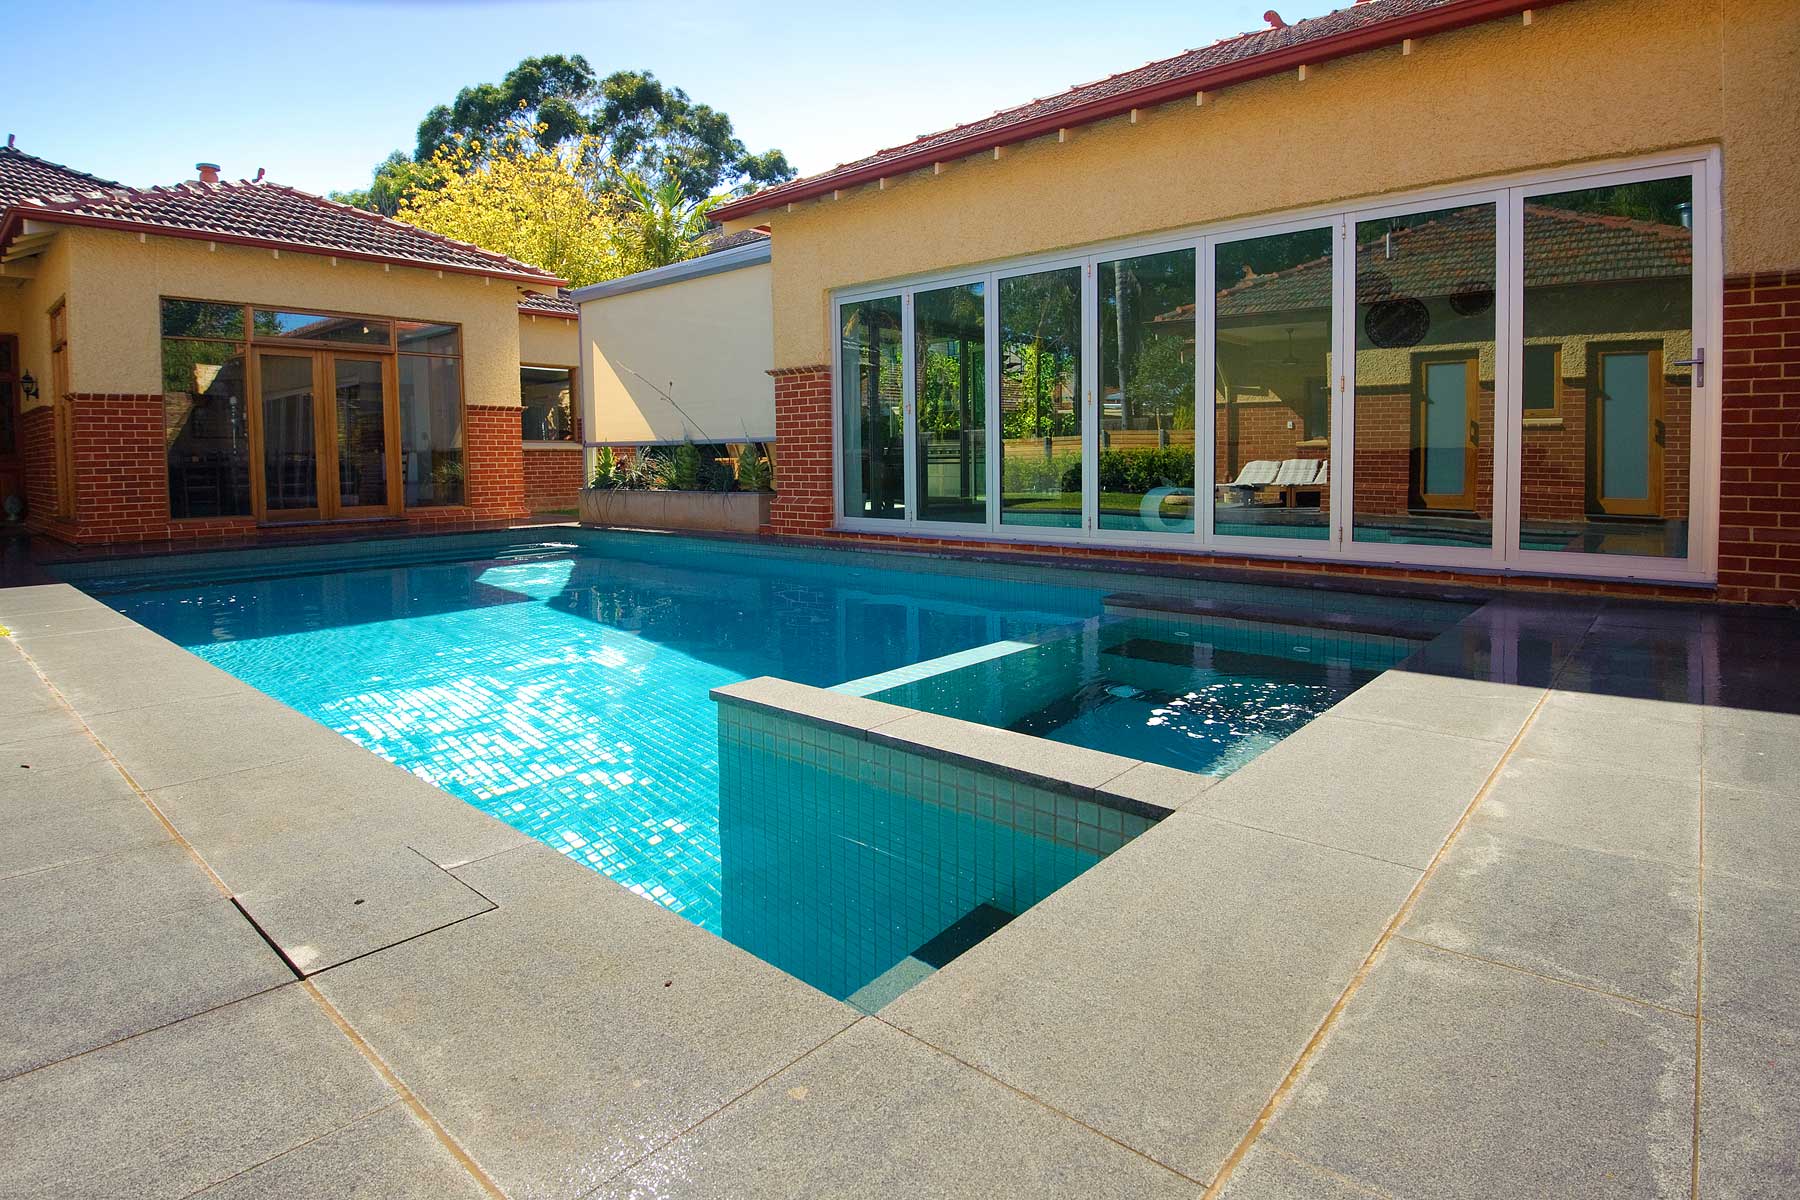 How Can A Renovation Company Make The Pool More Appealing